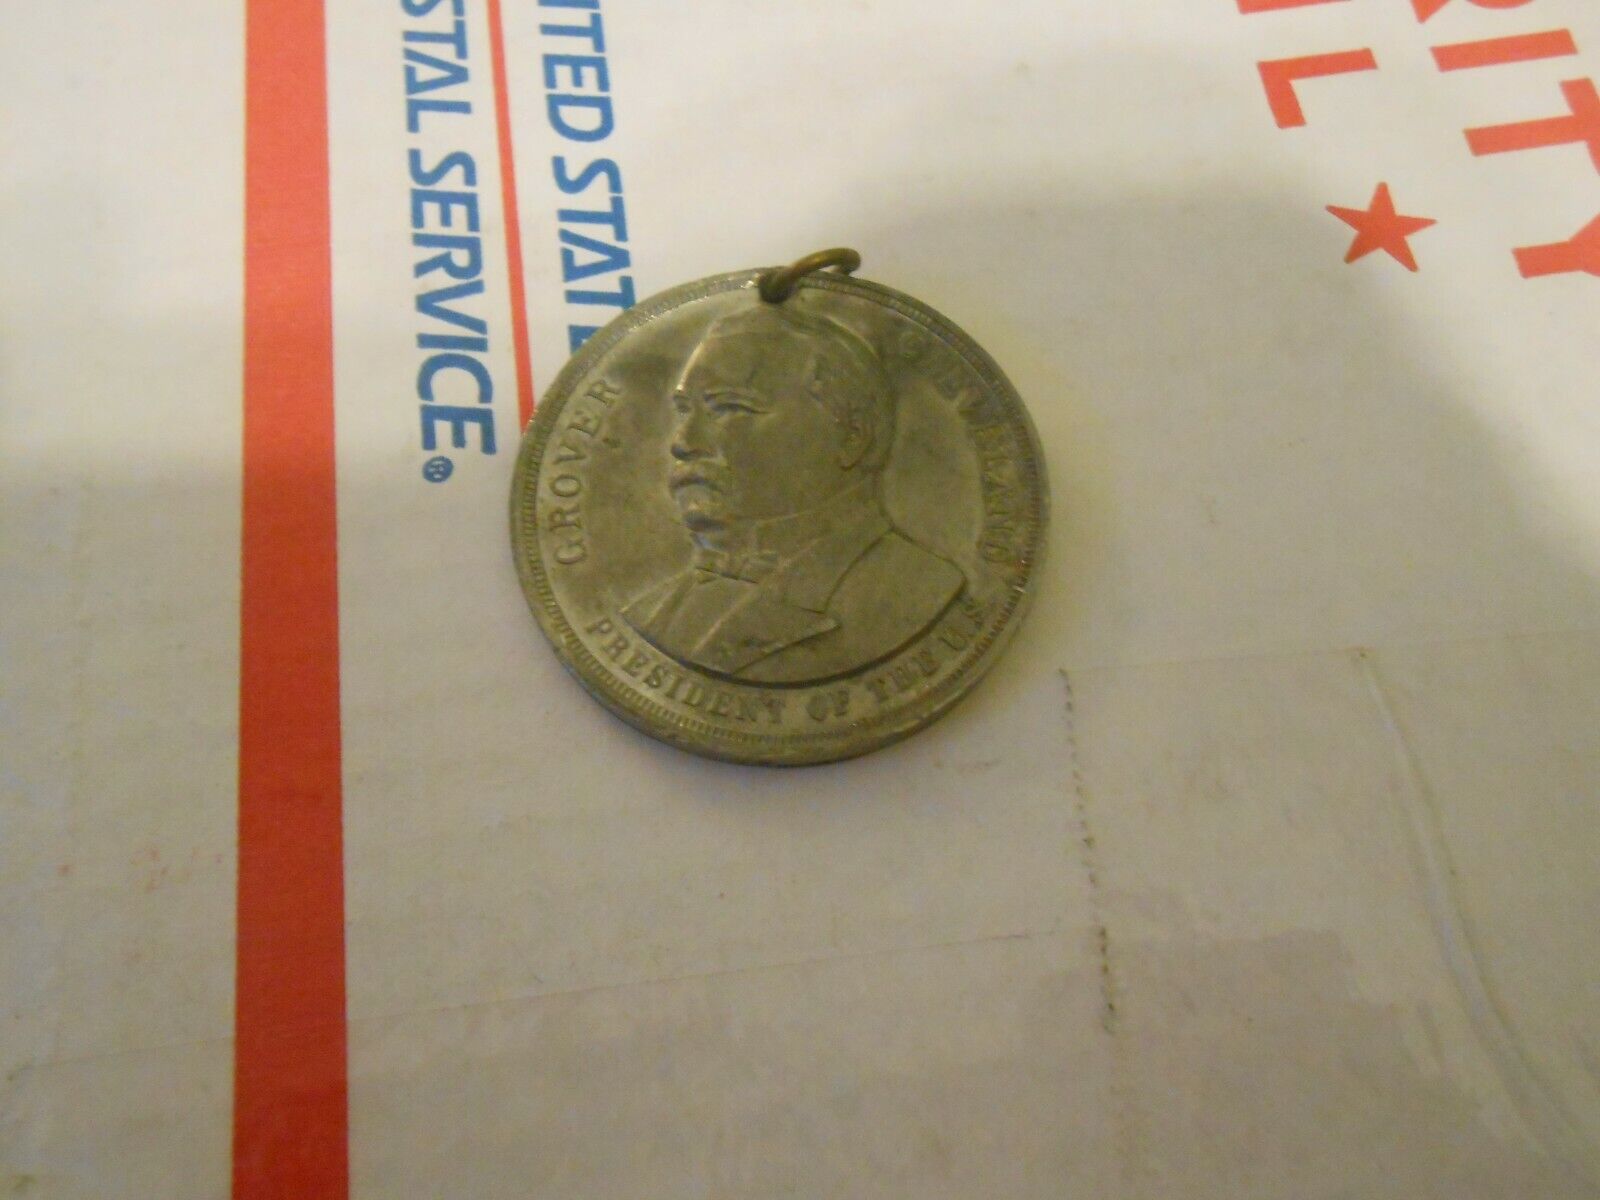 1893 President Grover Cleveland Inauguration Medal